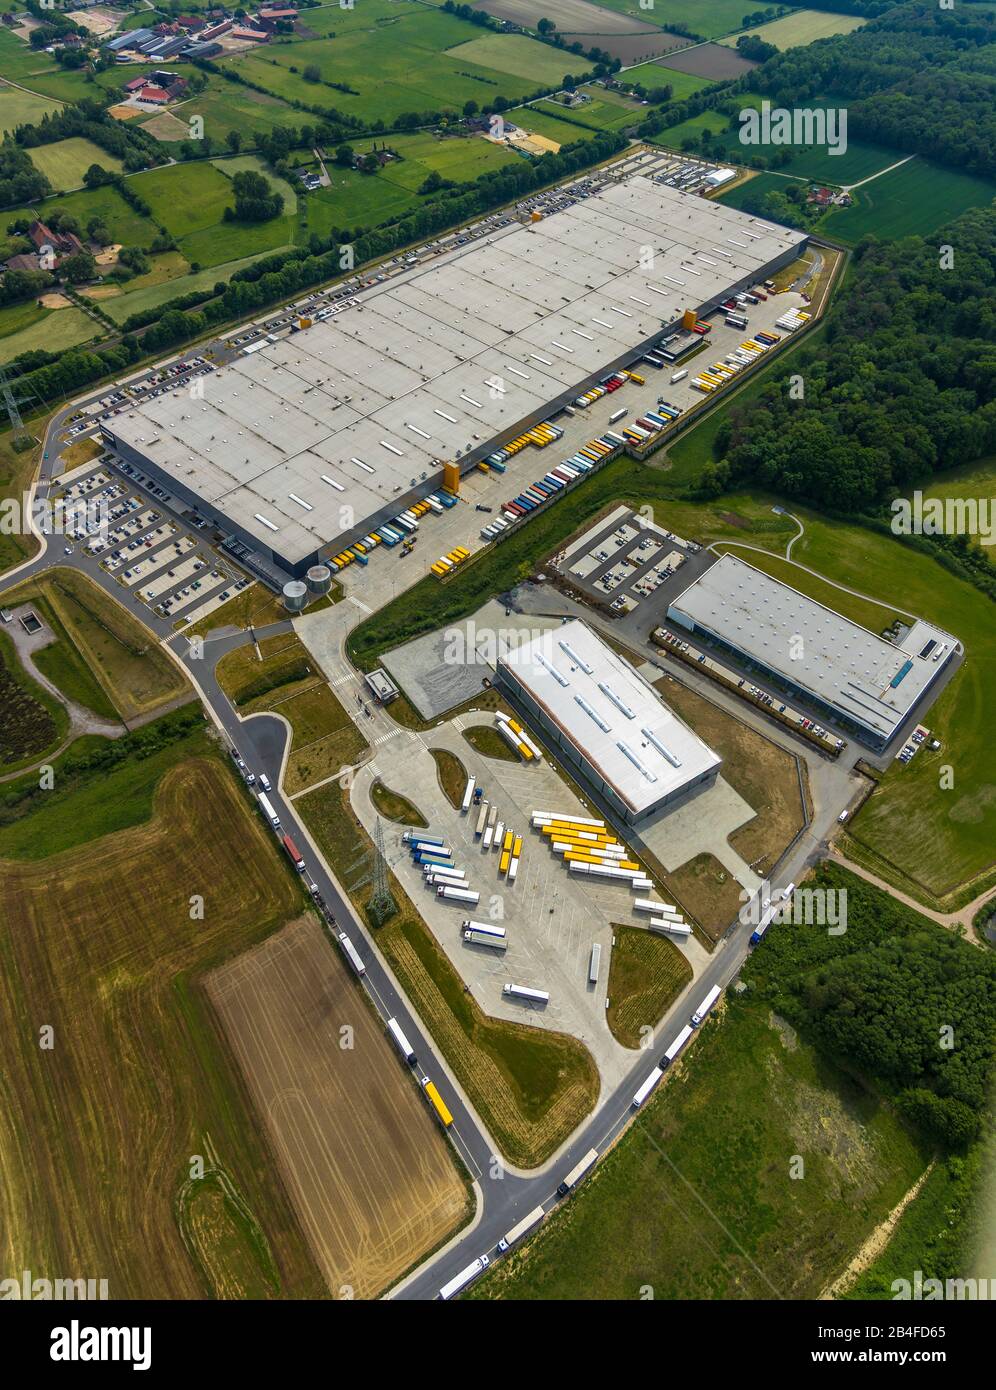 Aerial view of the truck parking lot of the logistics centre Amazon Logistik Werne GmbH - DTM1 in Werne, Ruhr area, North Rhine-Westphalia, Germany. Stock Photo